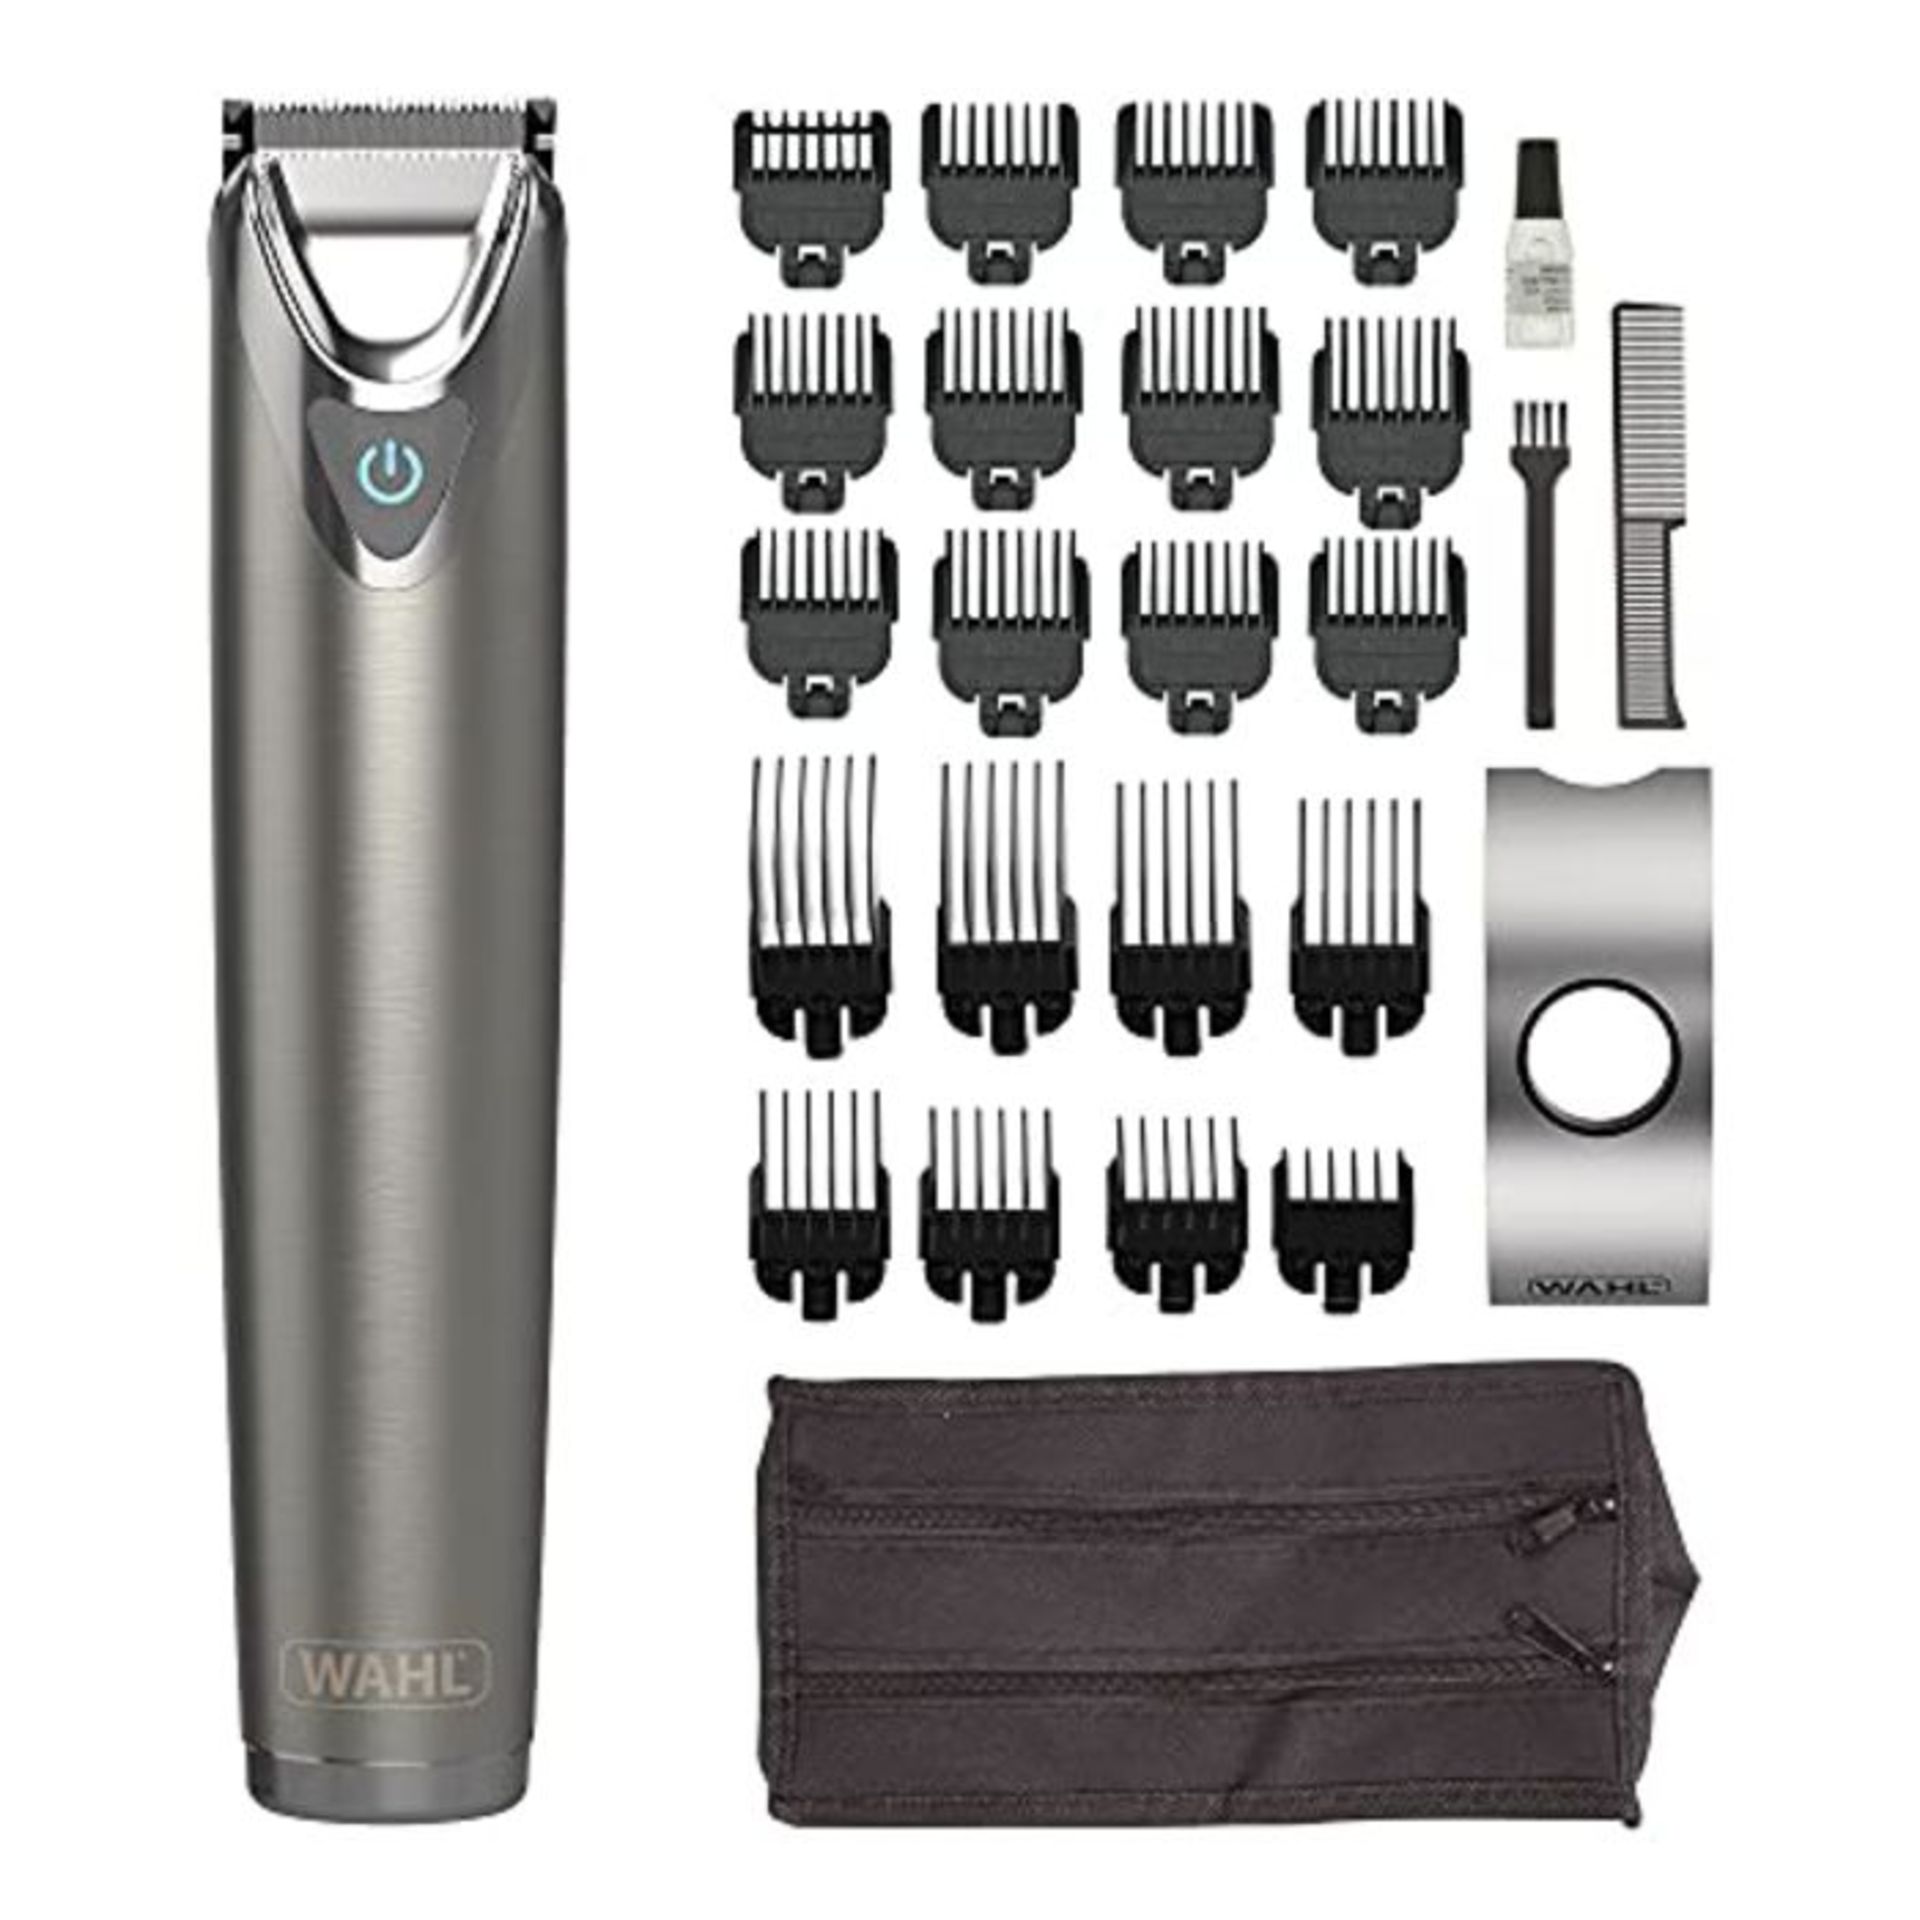 RRP £51.00 Wahl Beard Trimmer Men, Real Stainless Steel Hair Trimmers for Men, Stubble Trimmer, M